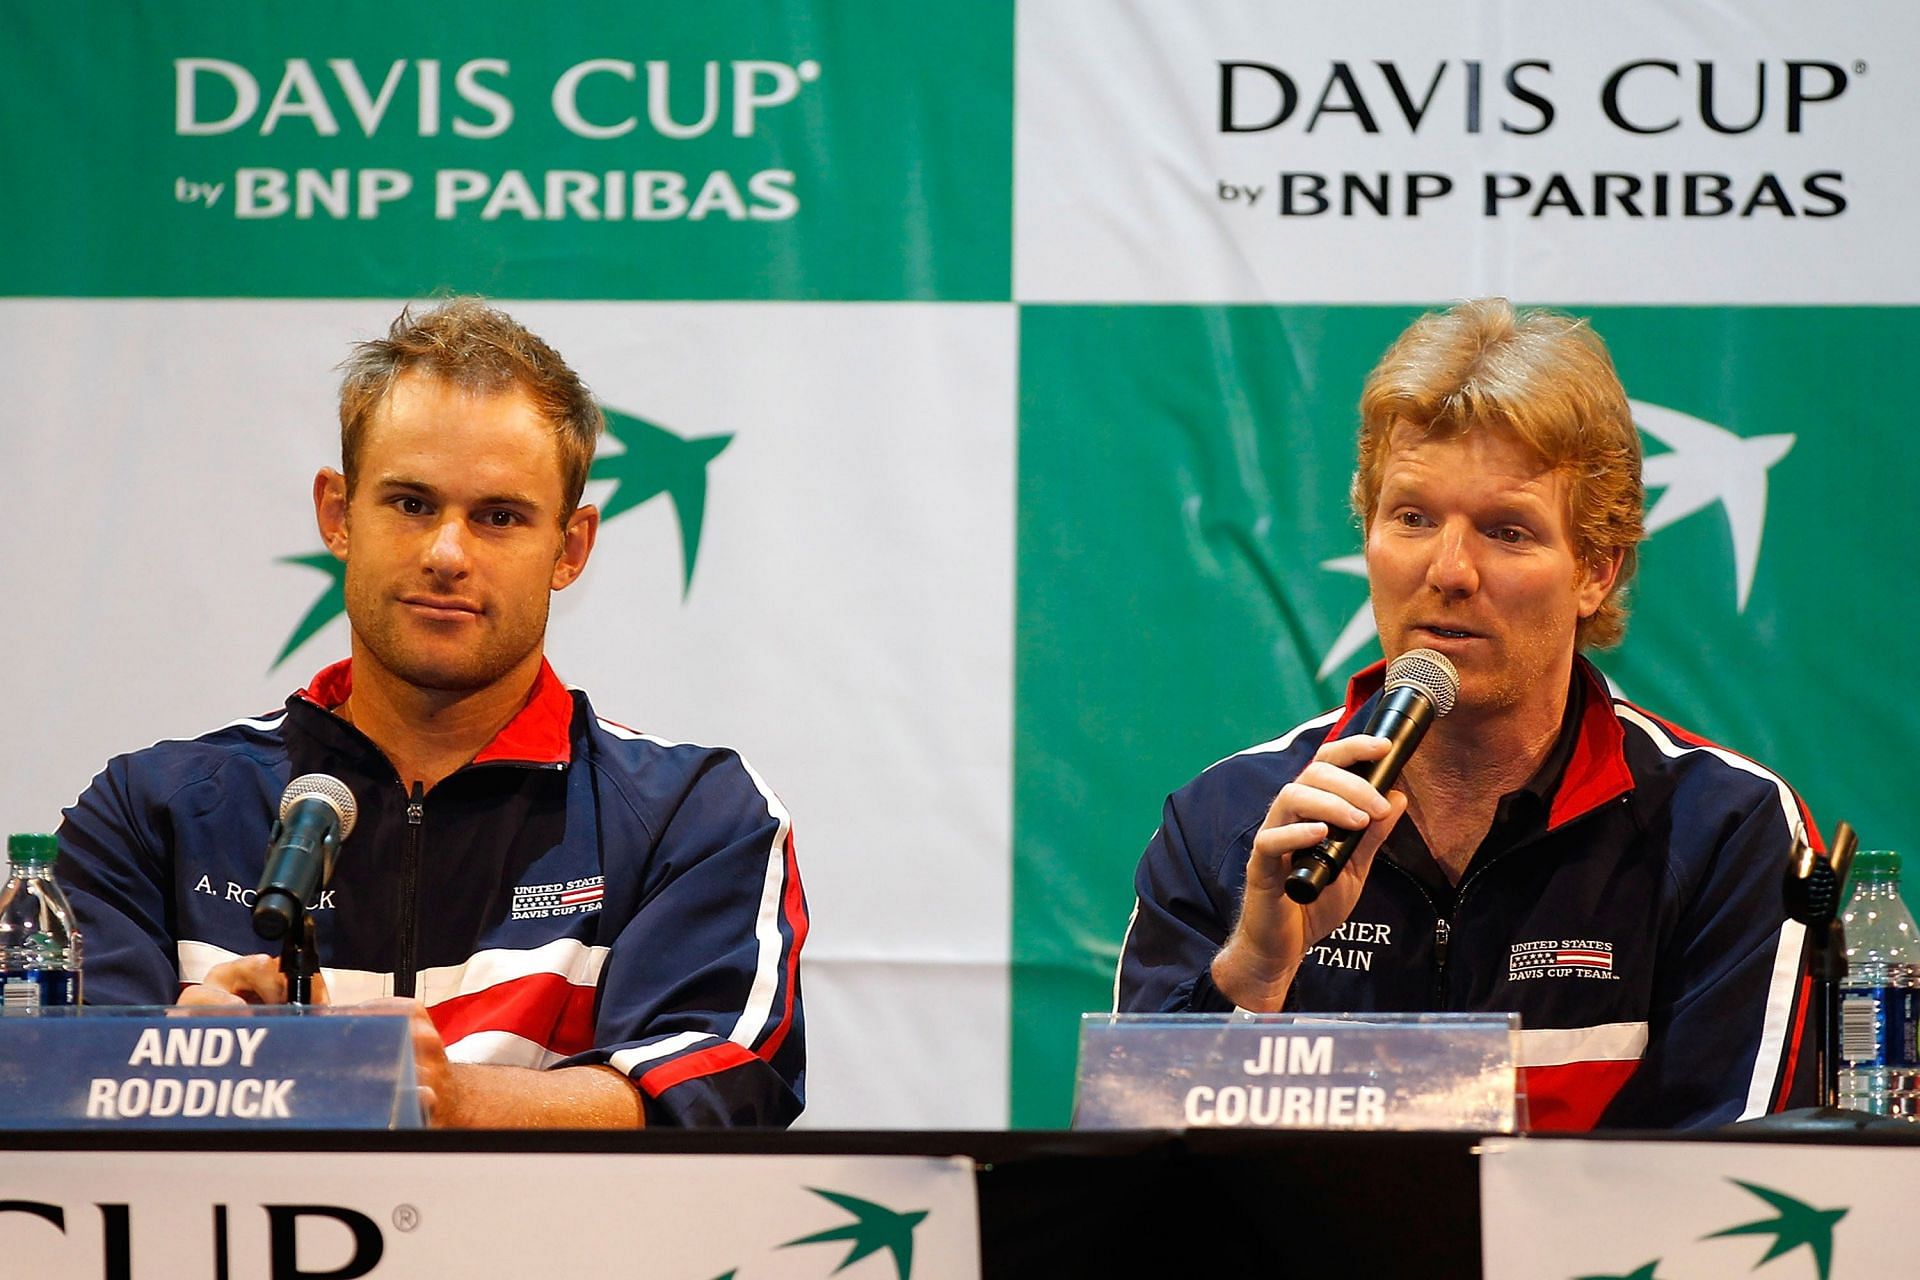 Andy Roddick (left) and captain Jim Courier (right) address the media after the Davis Cup draw ceremony on July 7, 2011.